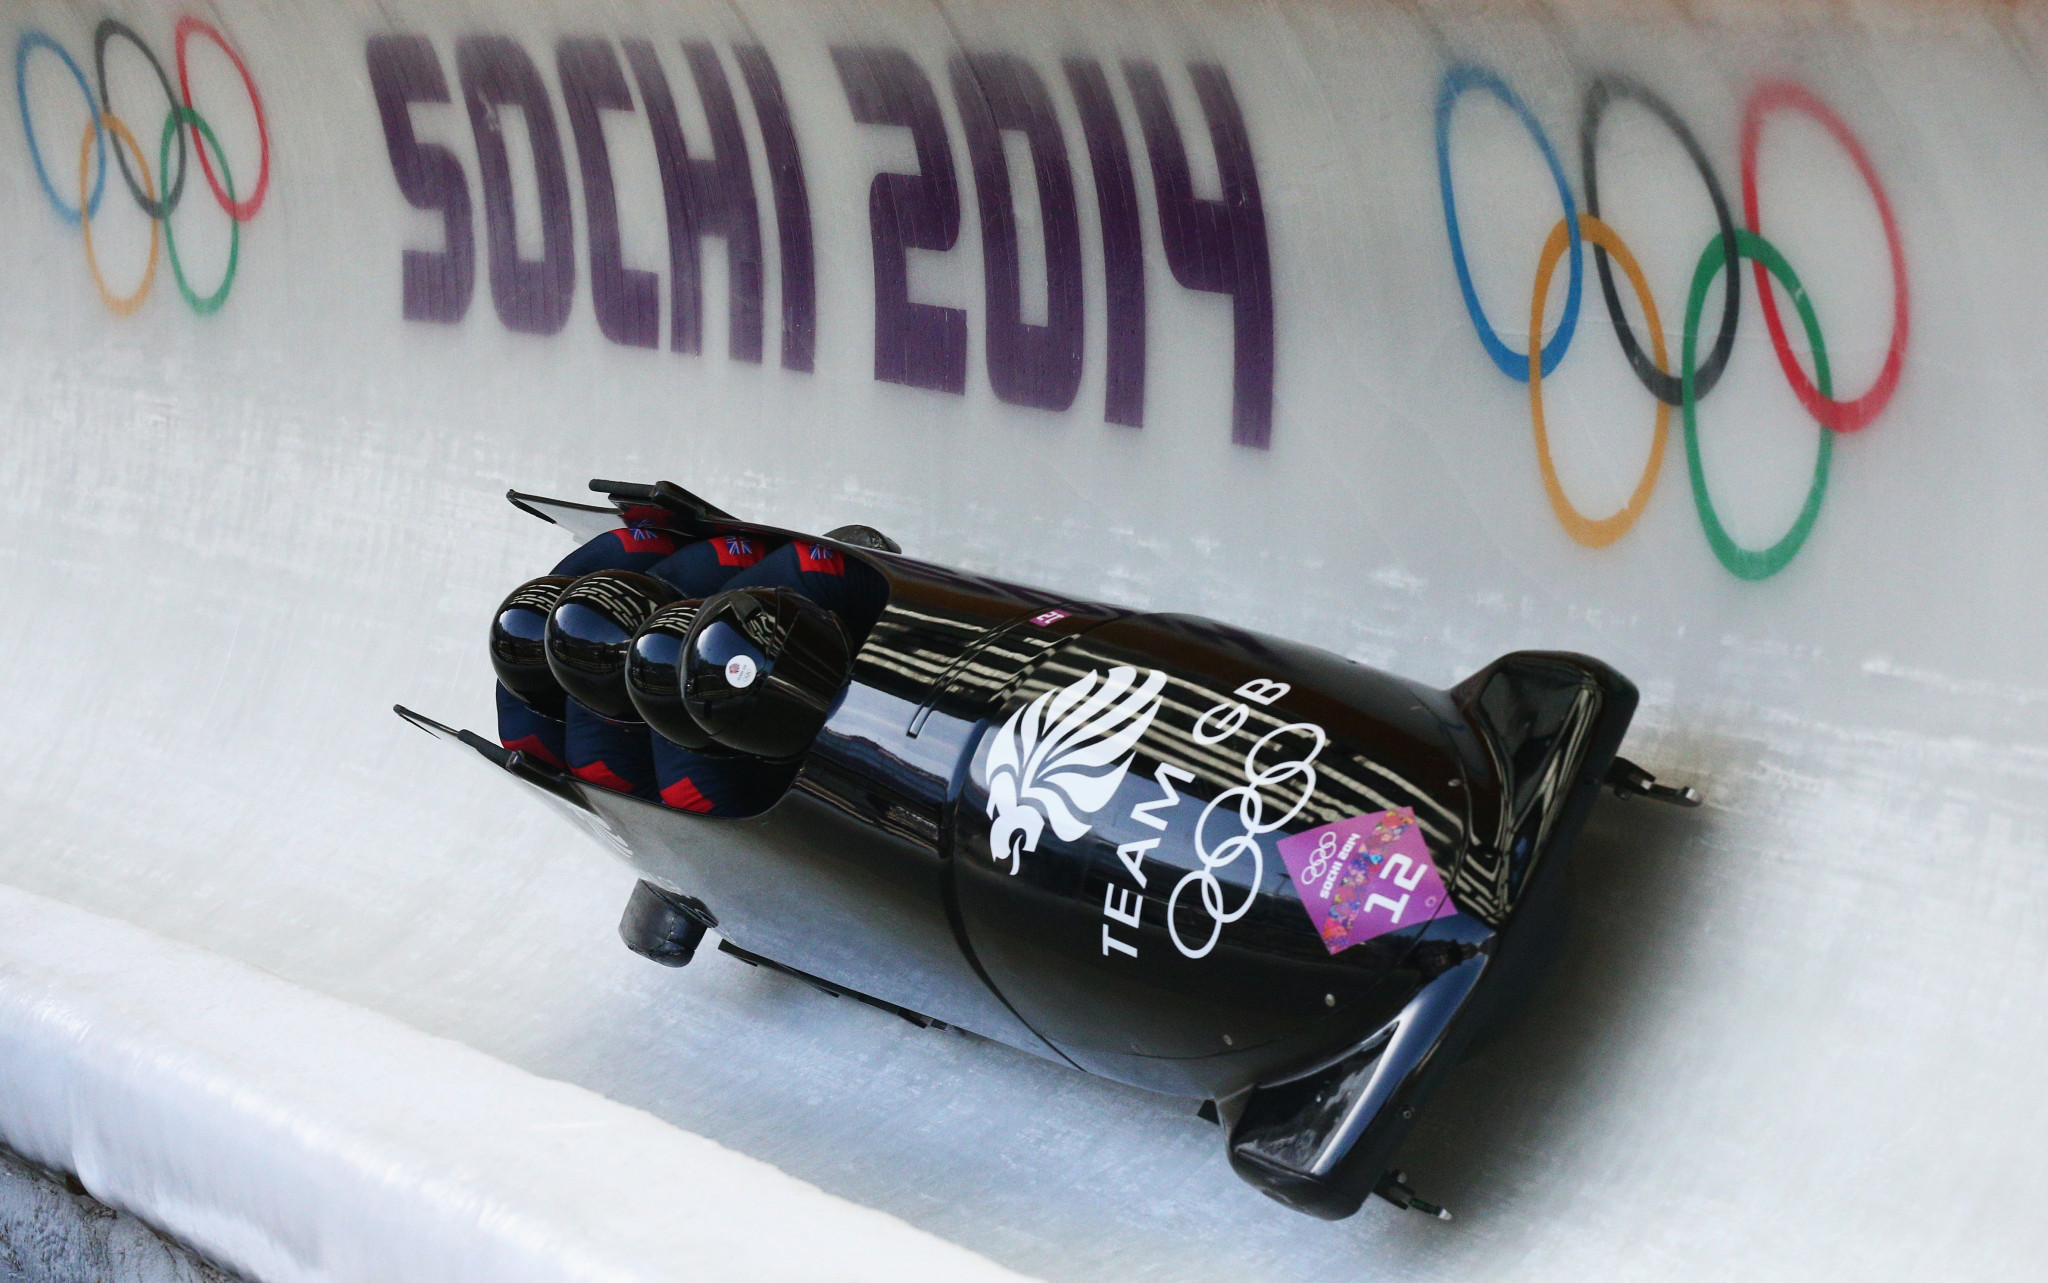 The British team initially finished fifth at Sochi 2014 ©Getty Images